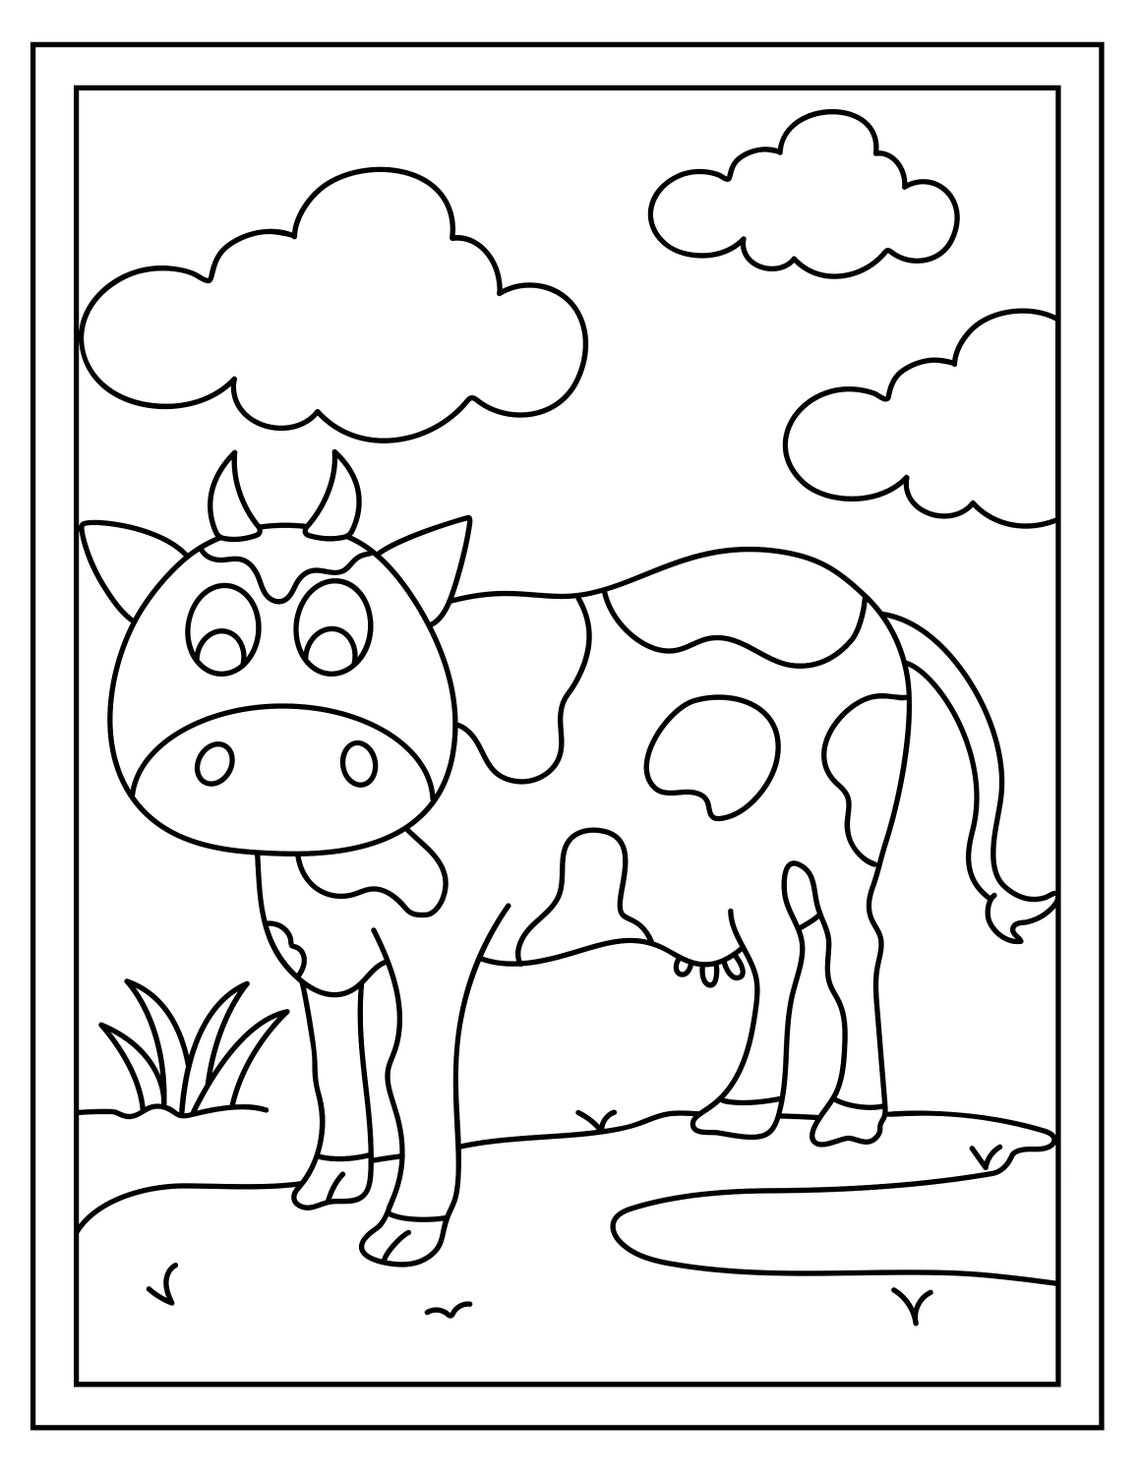 Domestic Animals 16 Printable Coloring Pages - Etsy